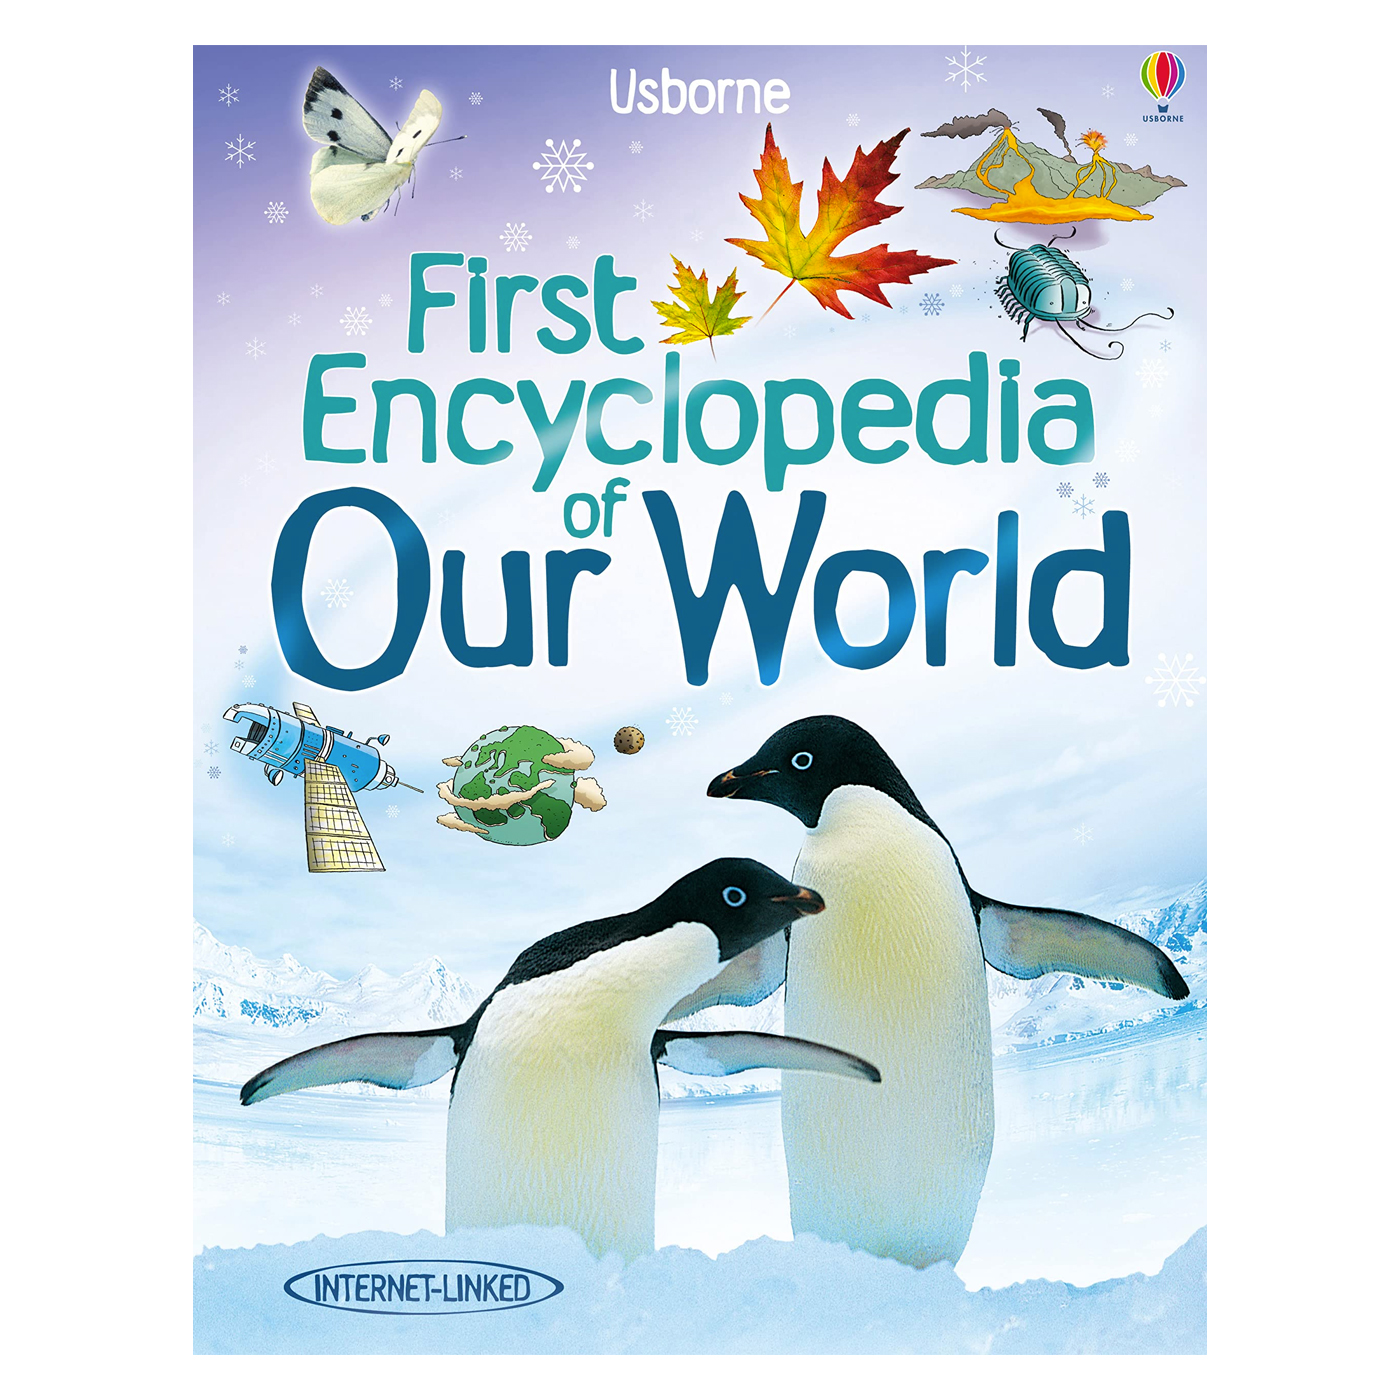  First Encyclopedia of Our World